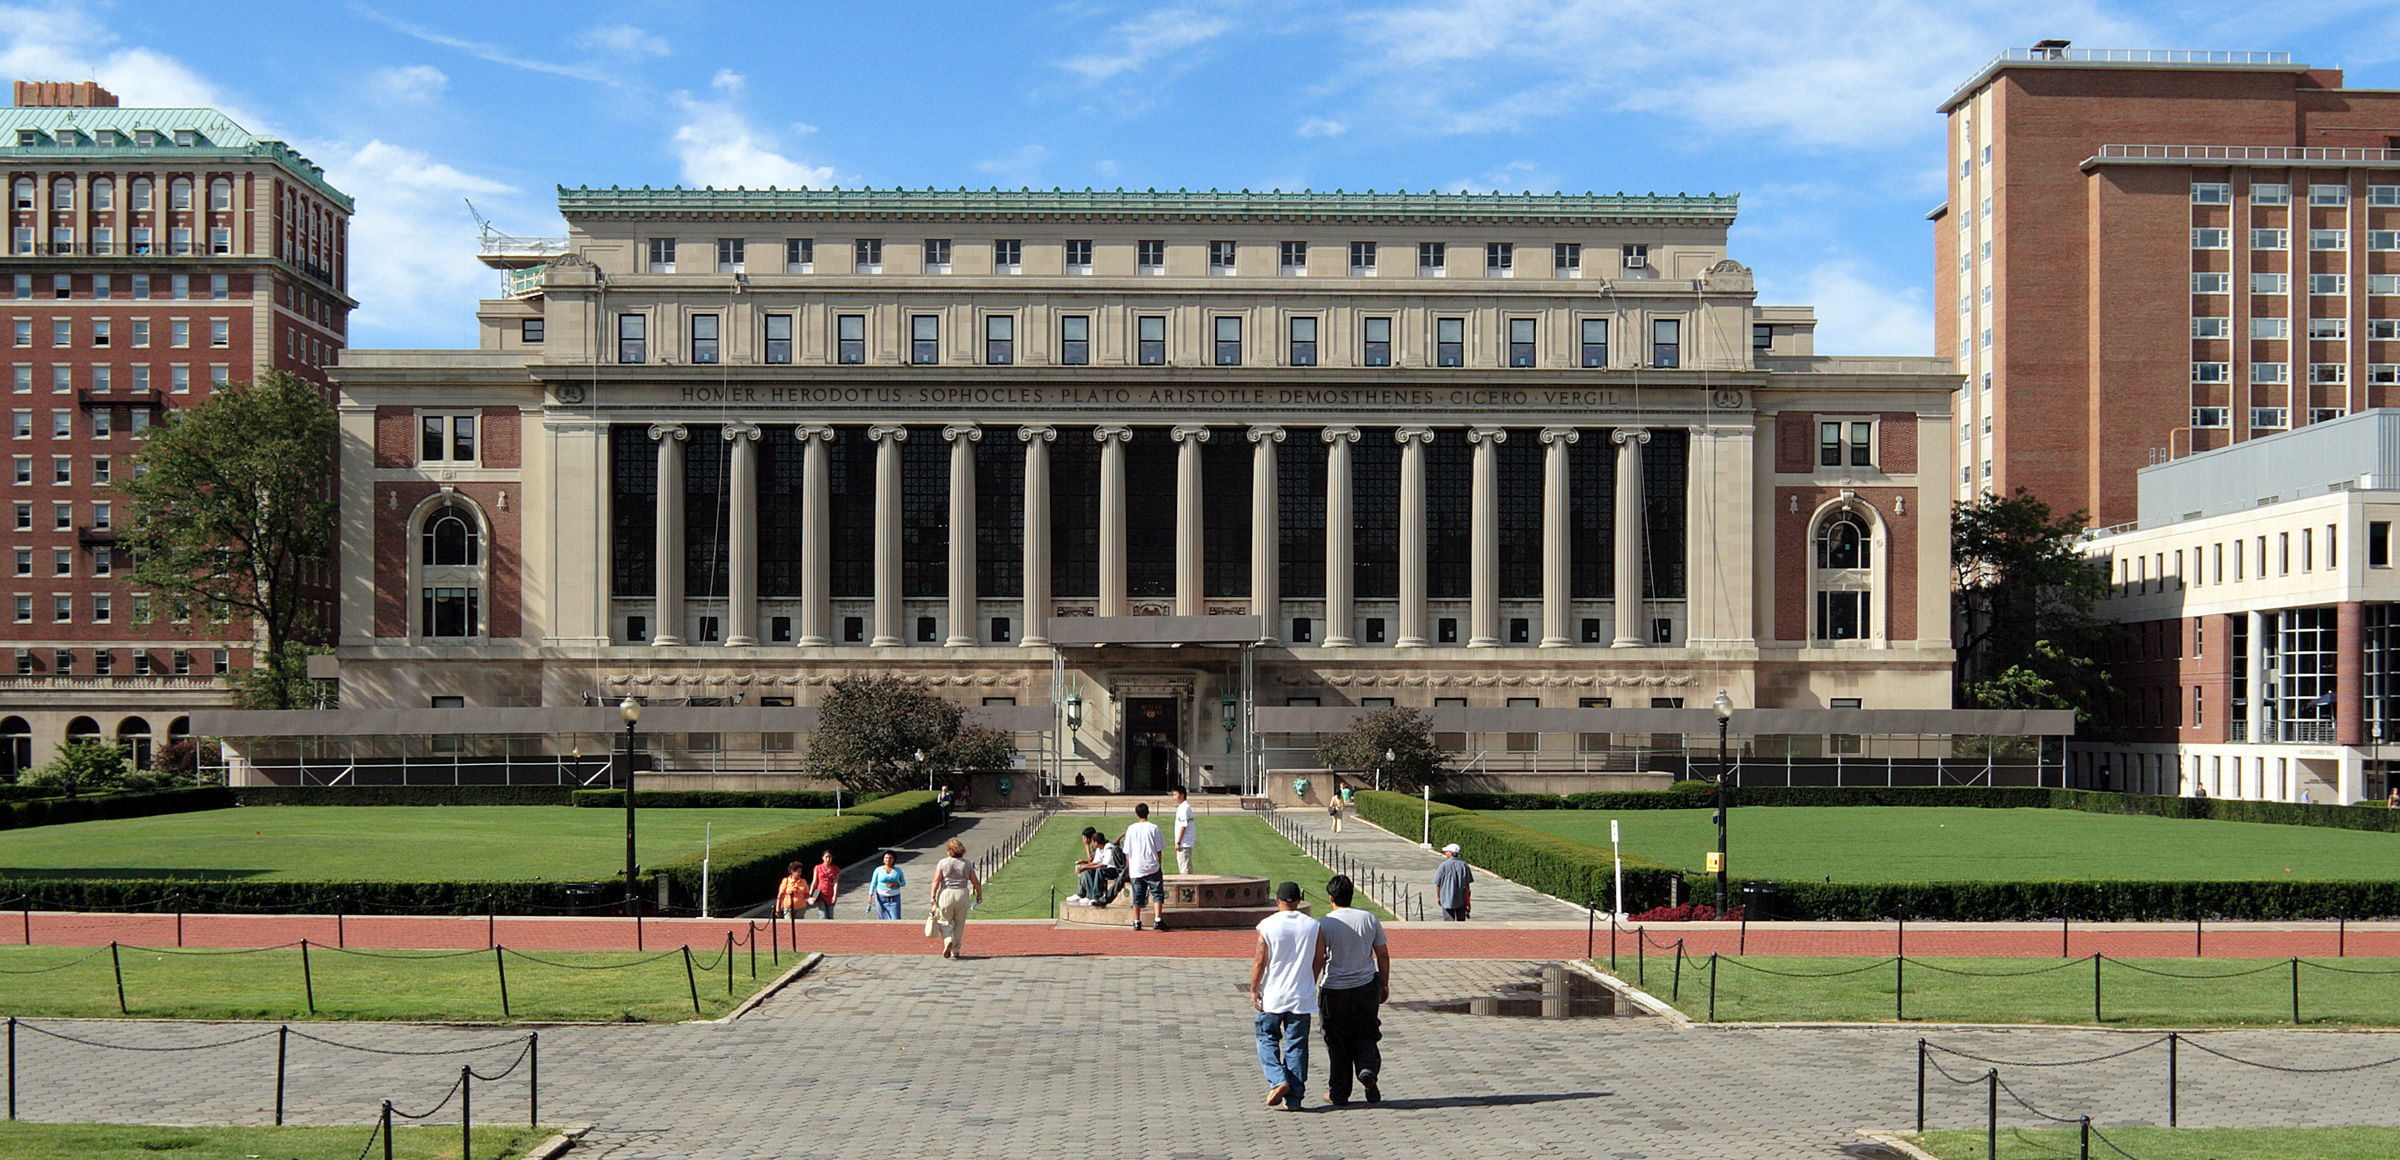 Experts and managers met at Columbia University to discuss the future of  the climate